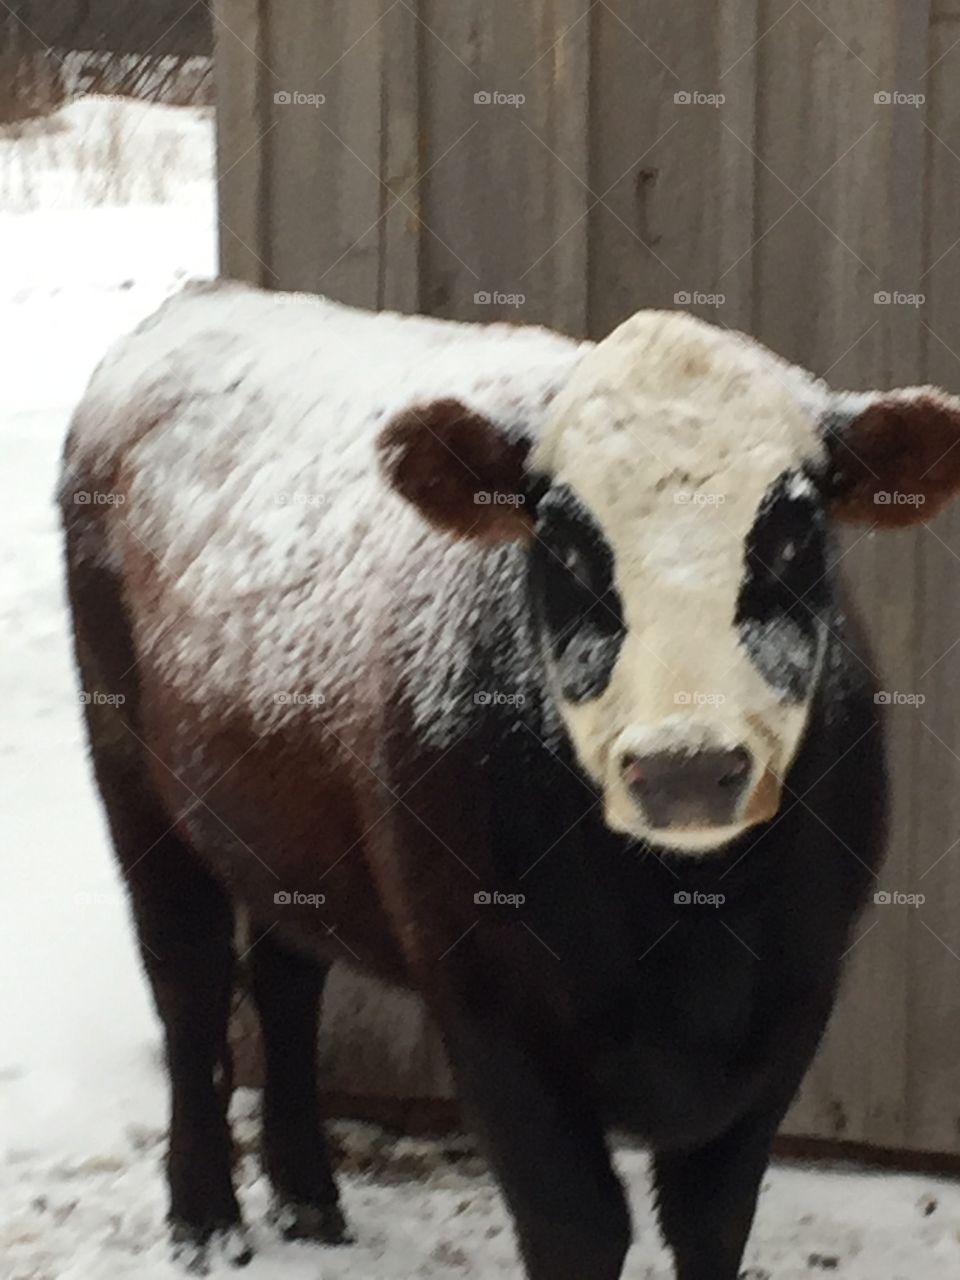 My Herford I see a little snow today a little more white than red Beautiful livestock.